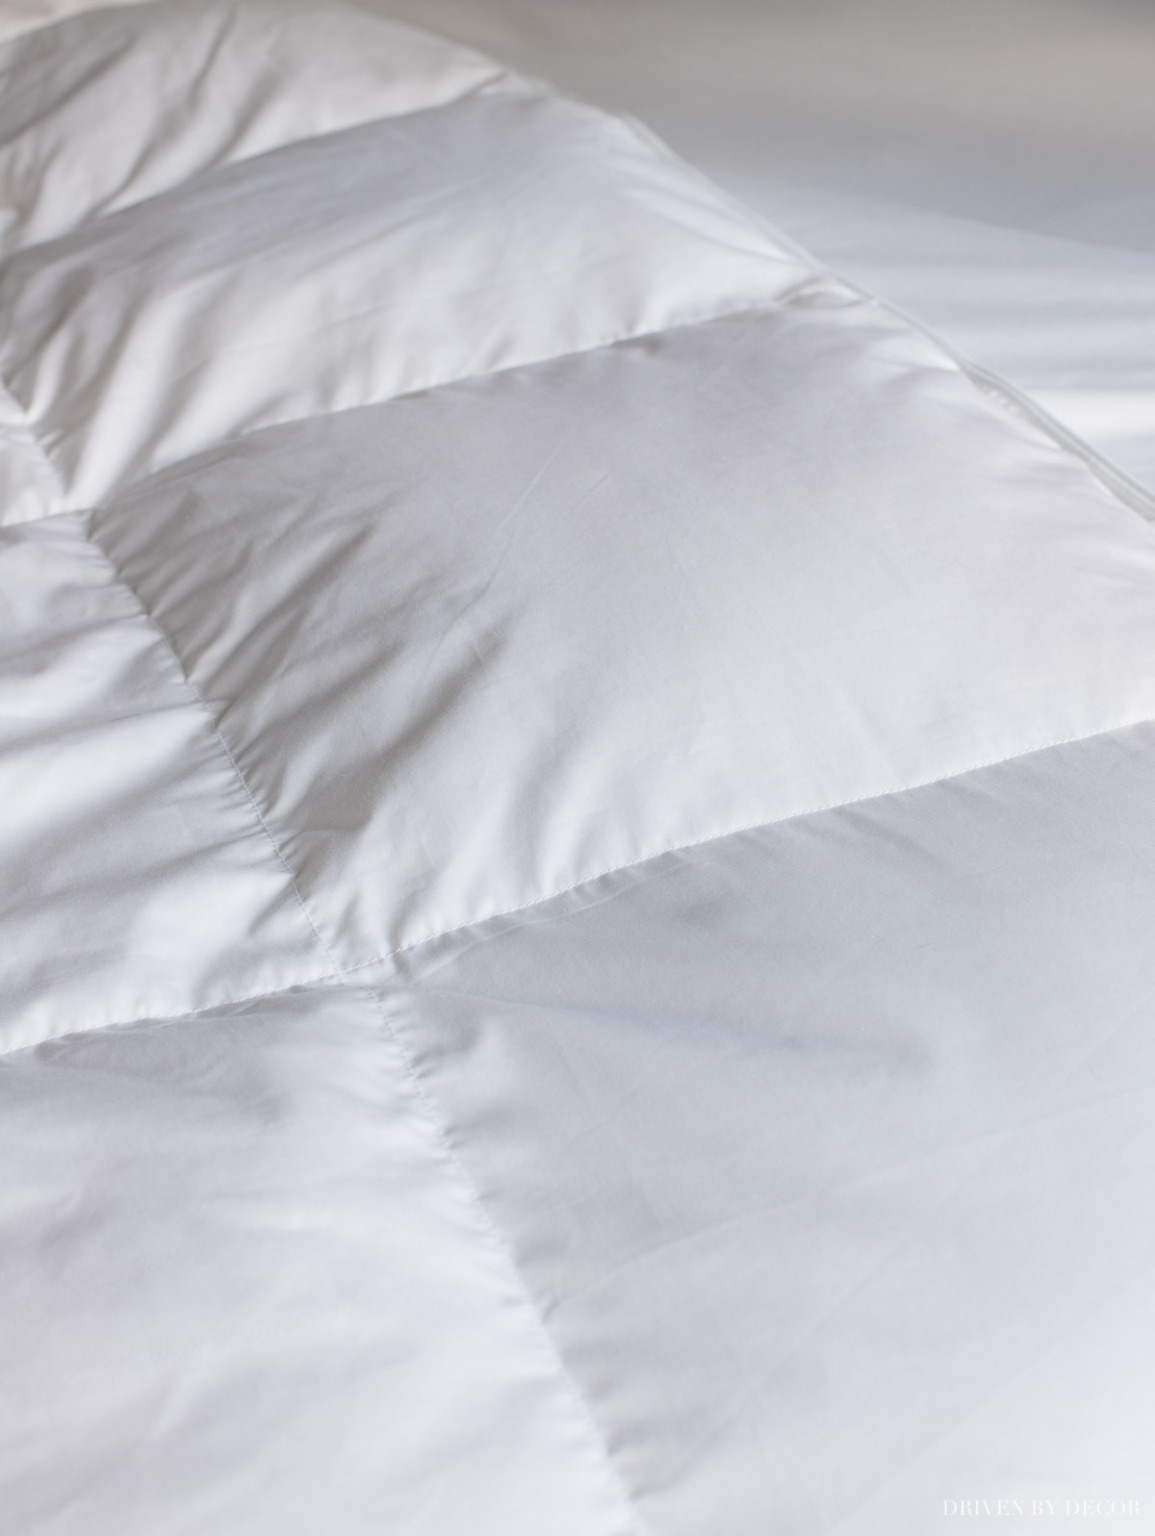 The Best Fluffy Duvet Inserts: 7 Things to Look For (To Get a Fluffy ...